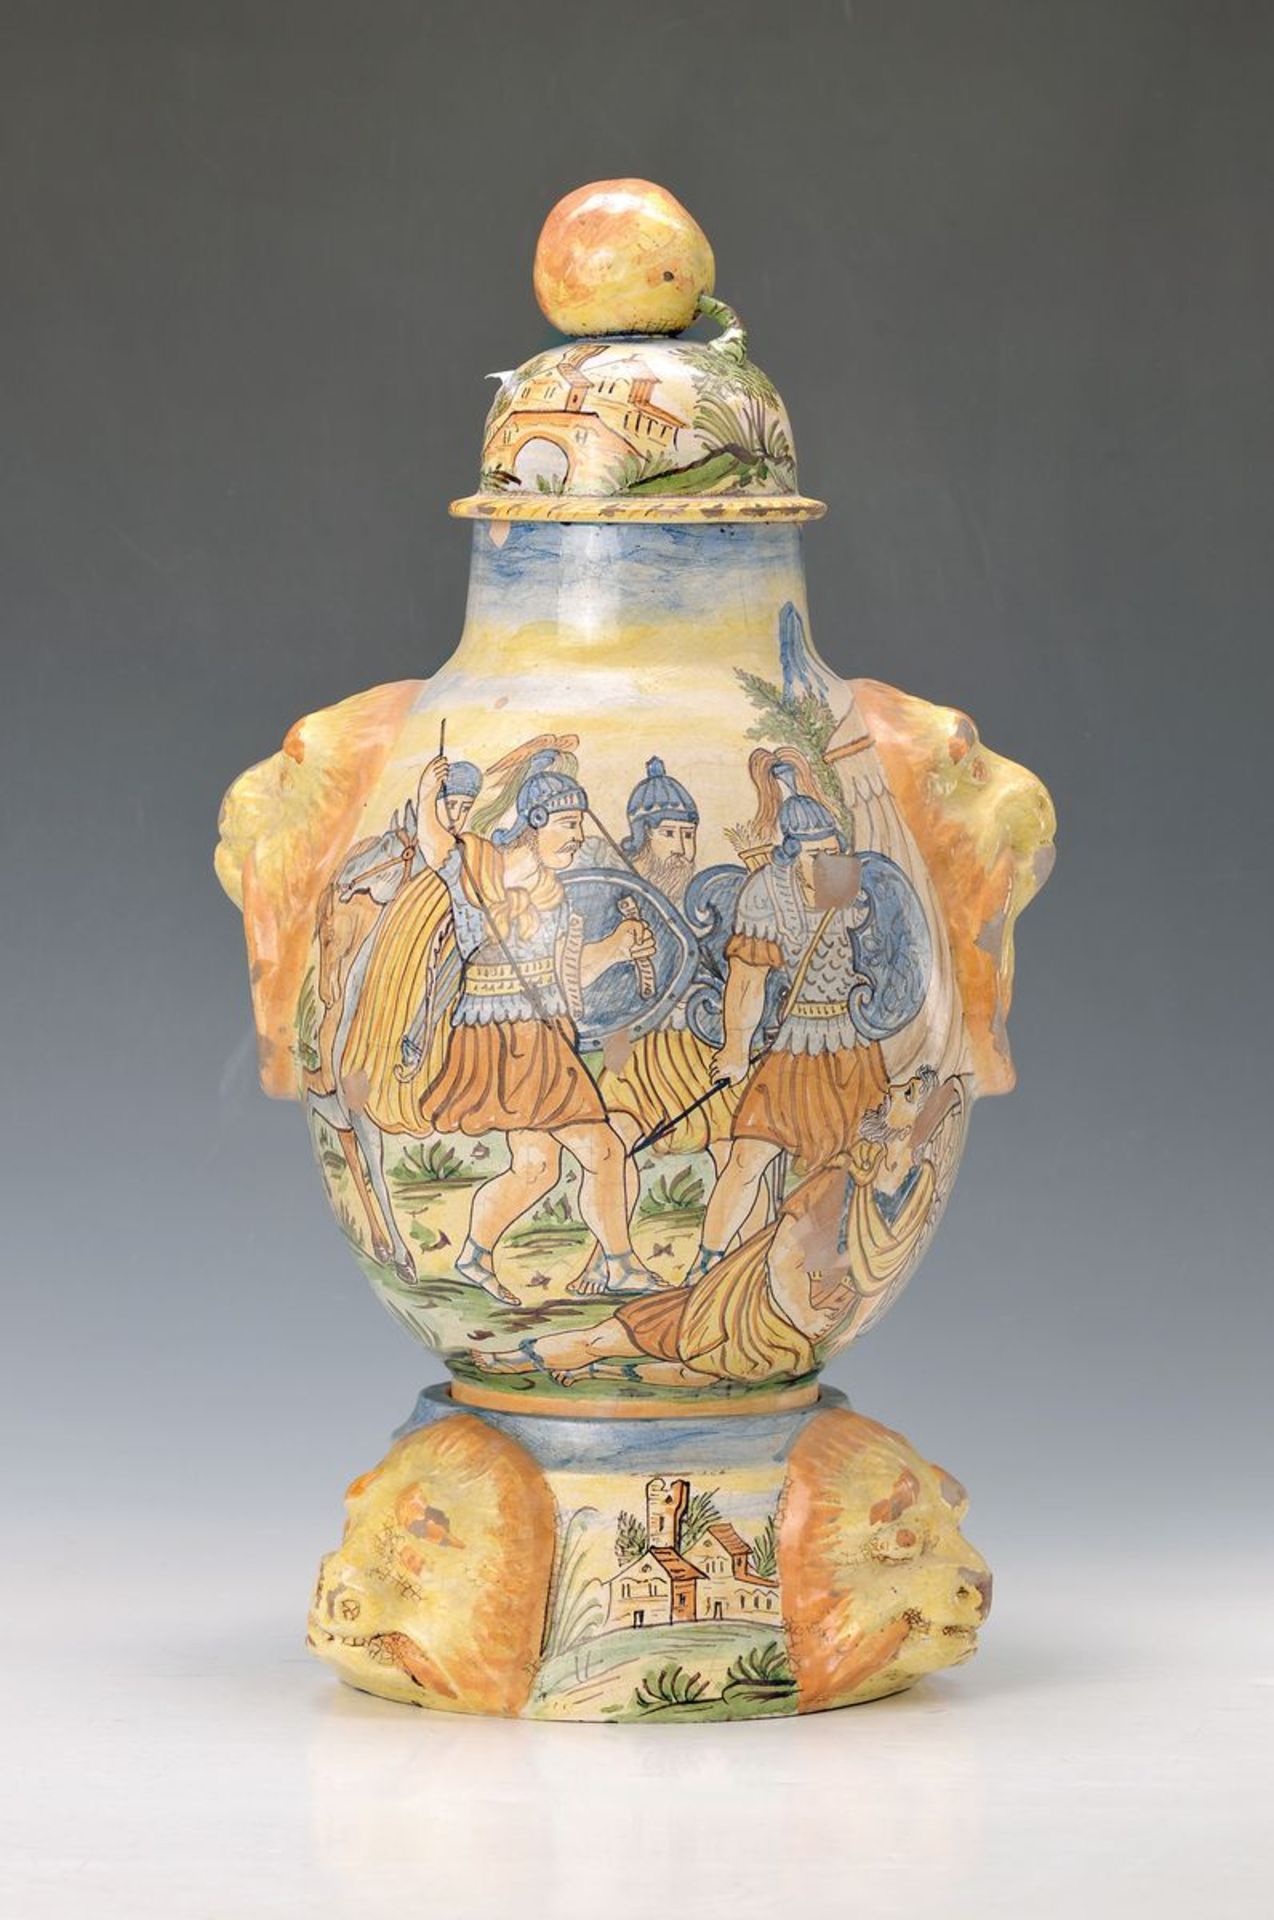 Large faience-vase with cover and pedestal, Florence, 19th c., painted in bright colors with antique